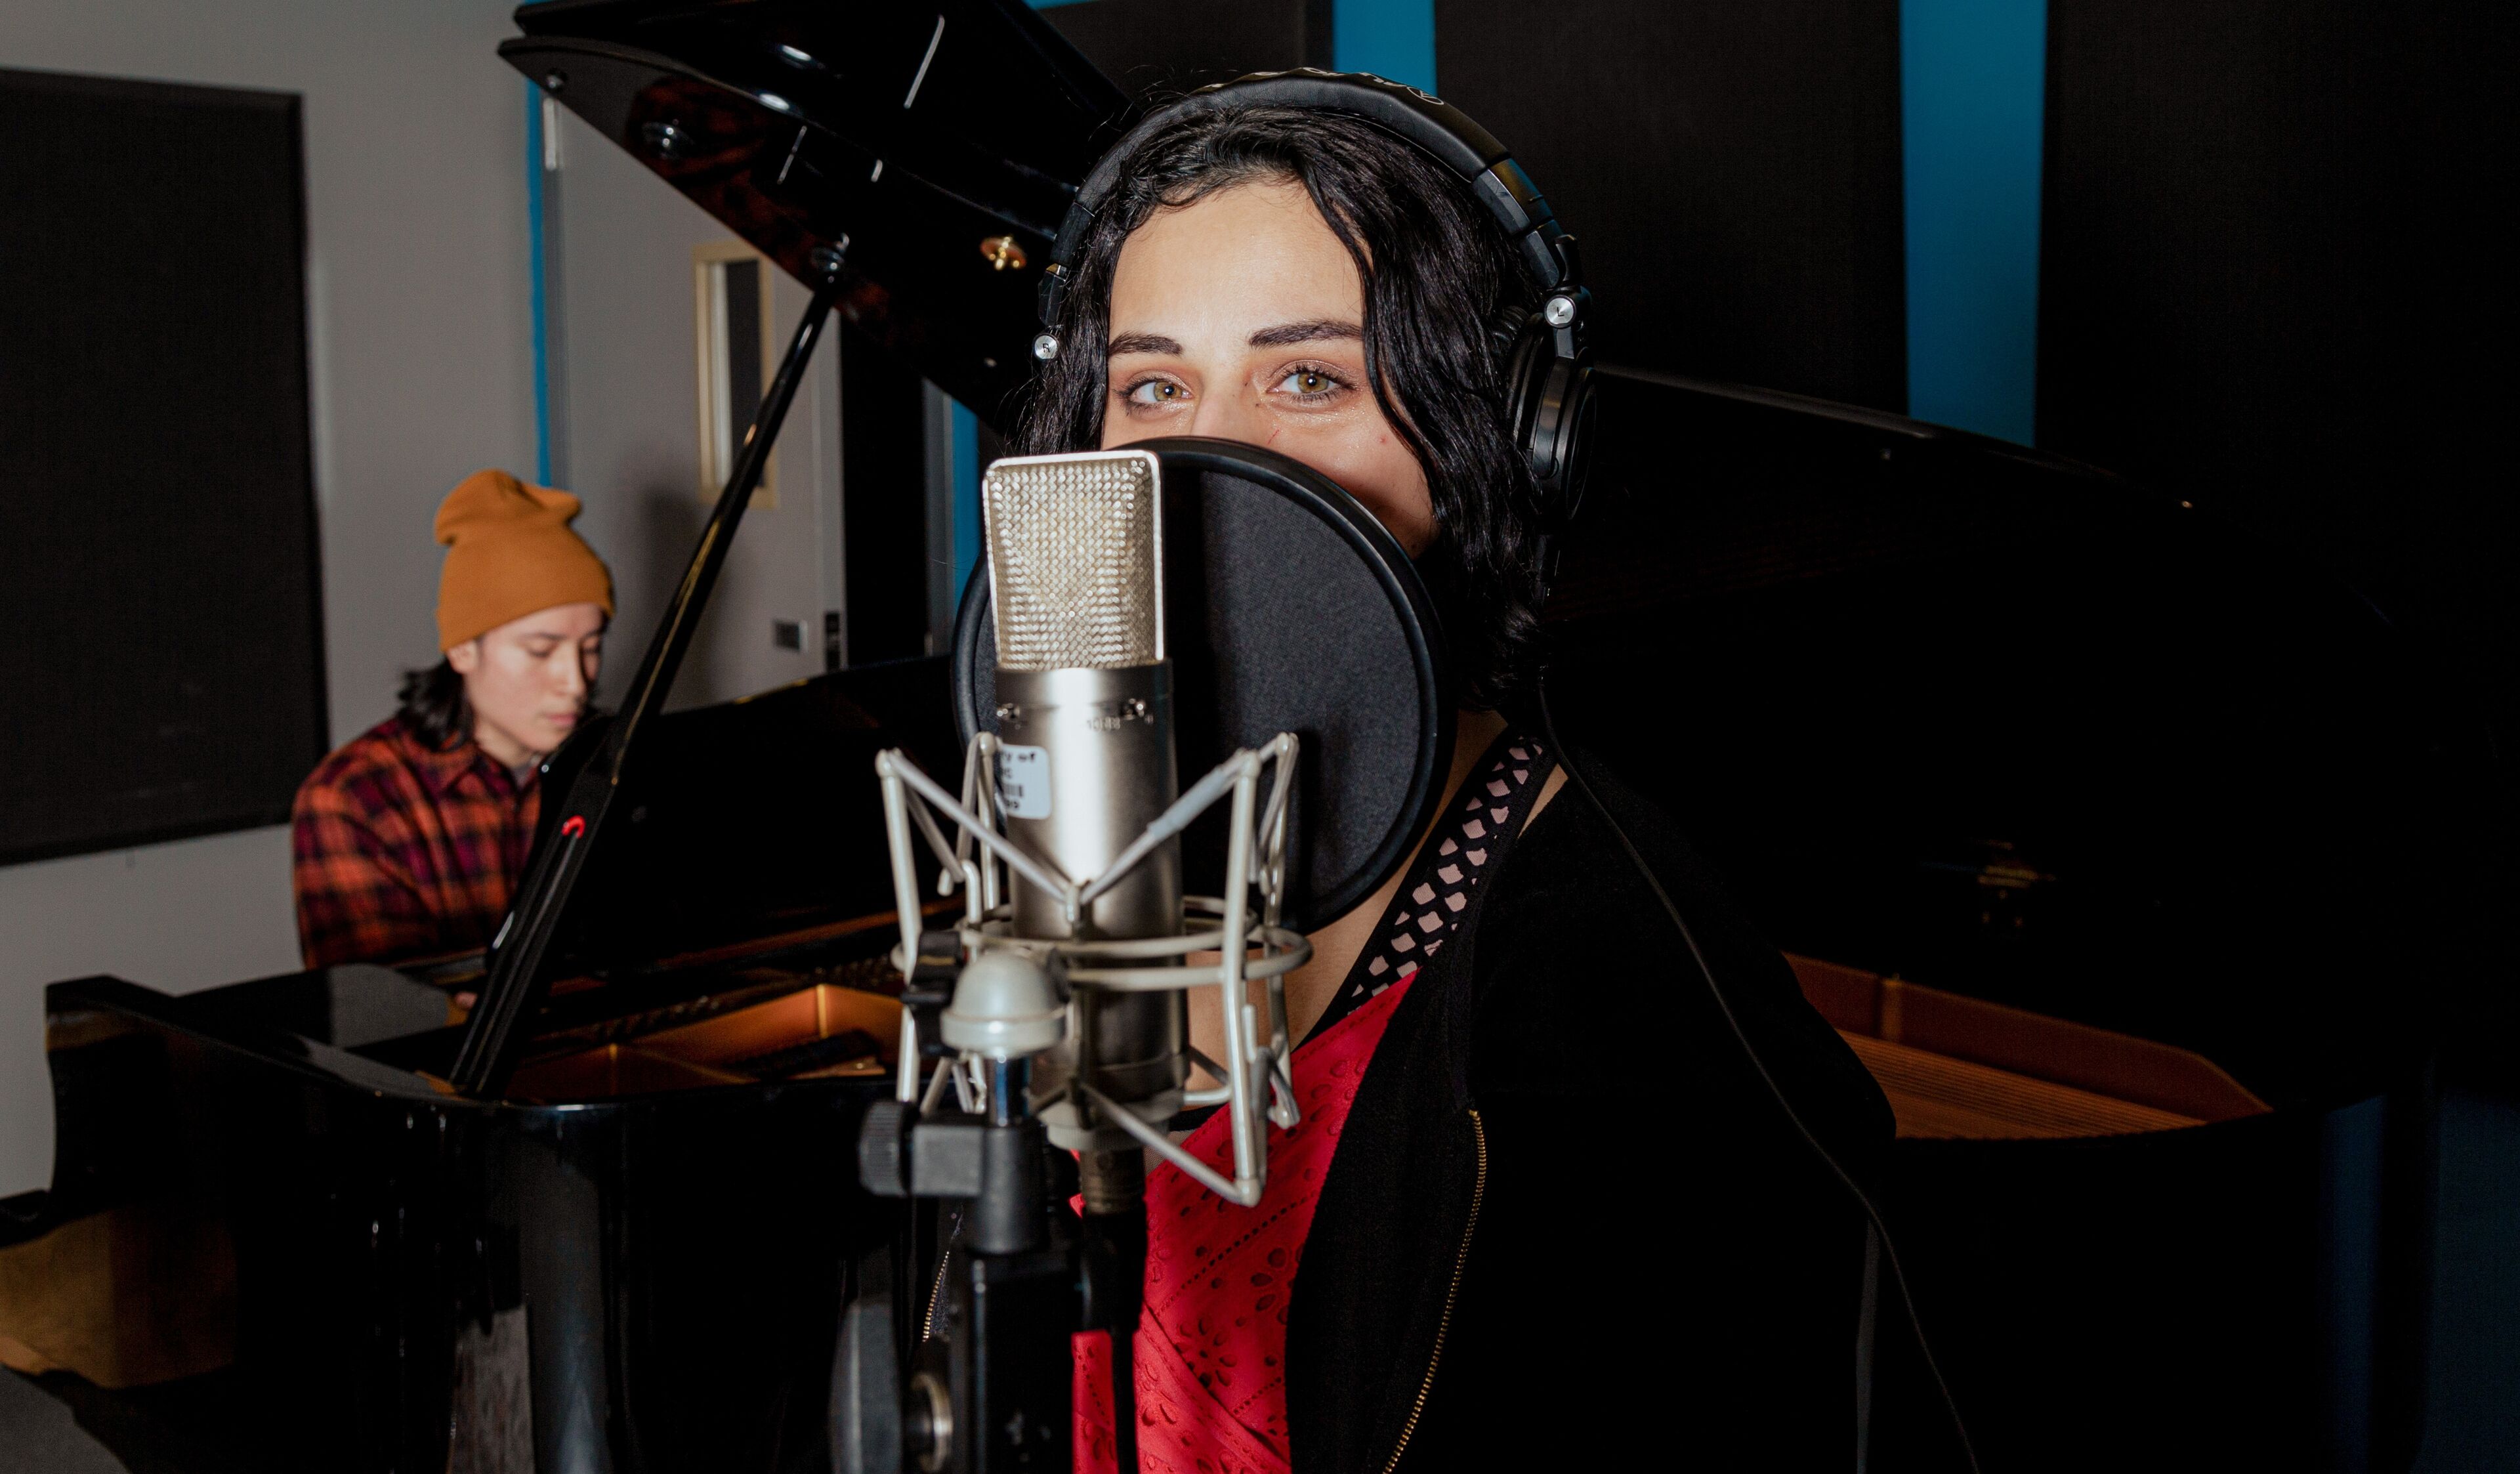 A vocalist recording vocals while a pianist accompanies in a soundproof studio.